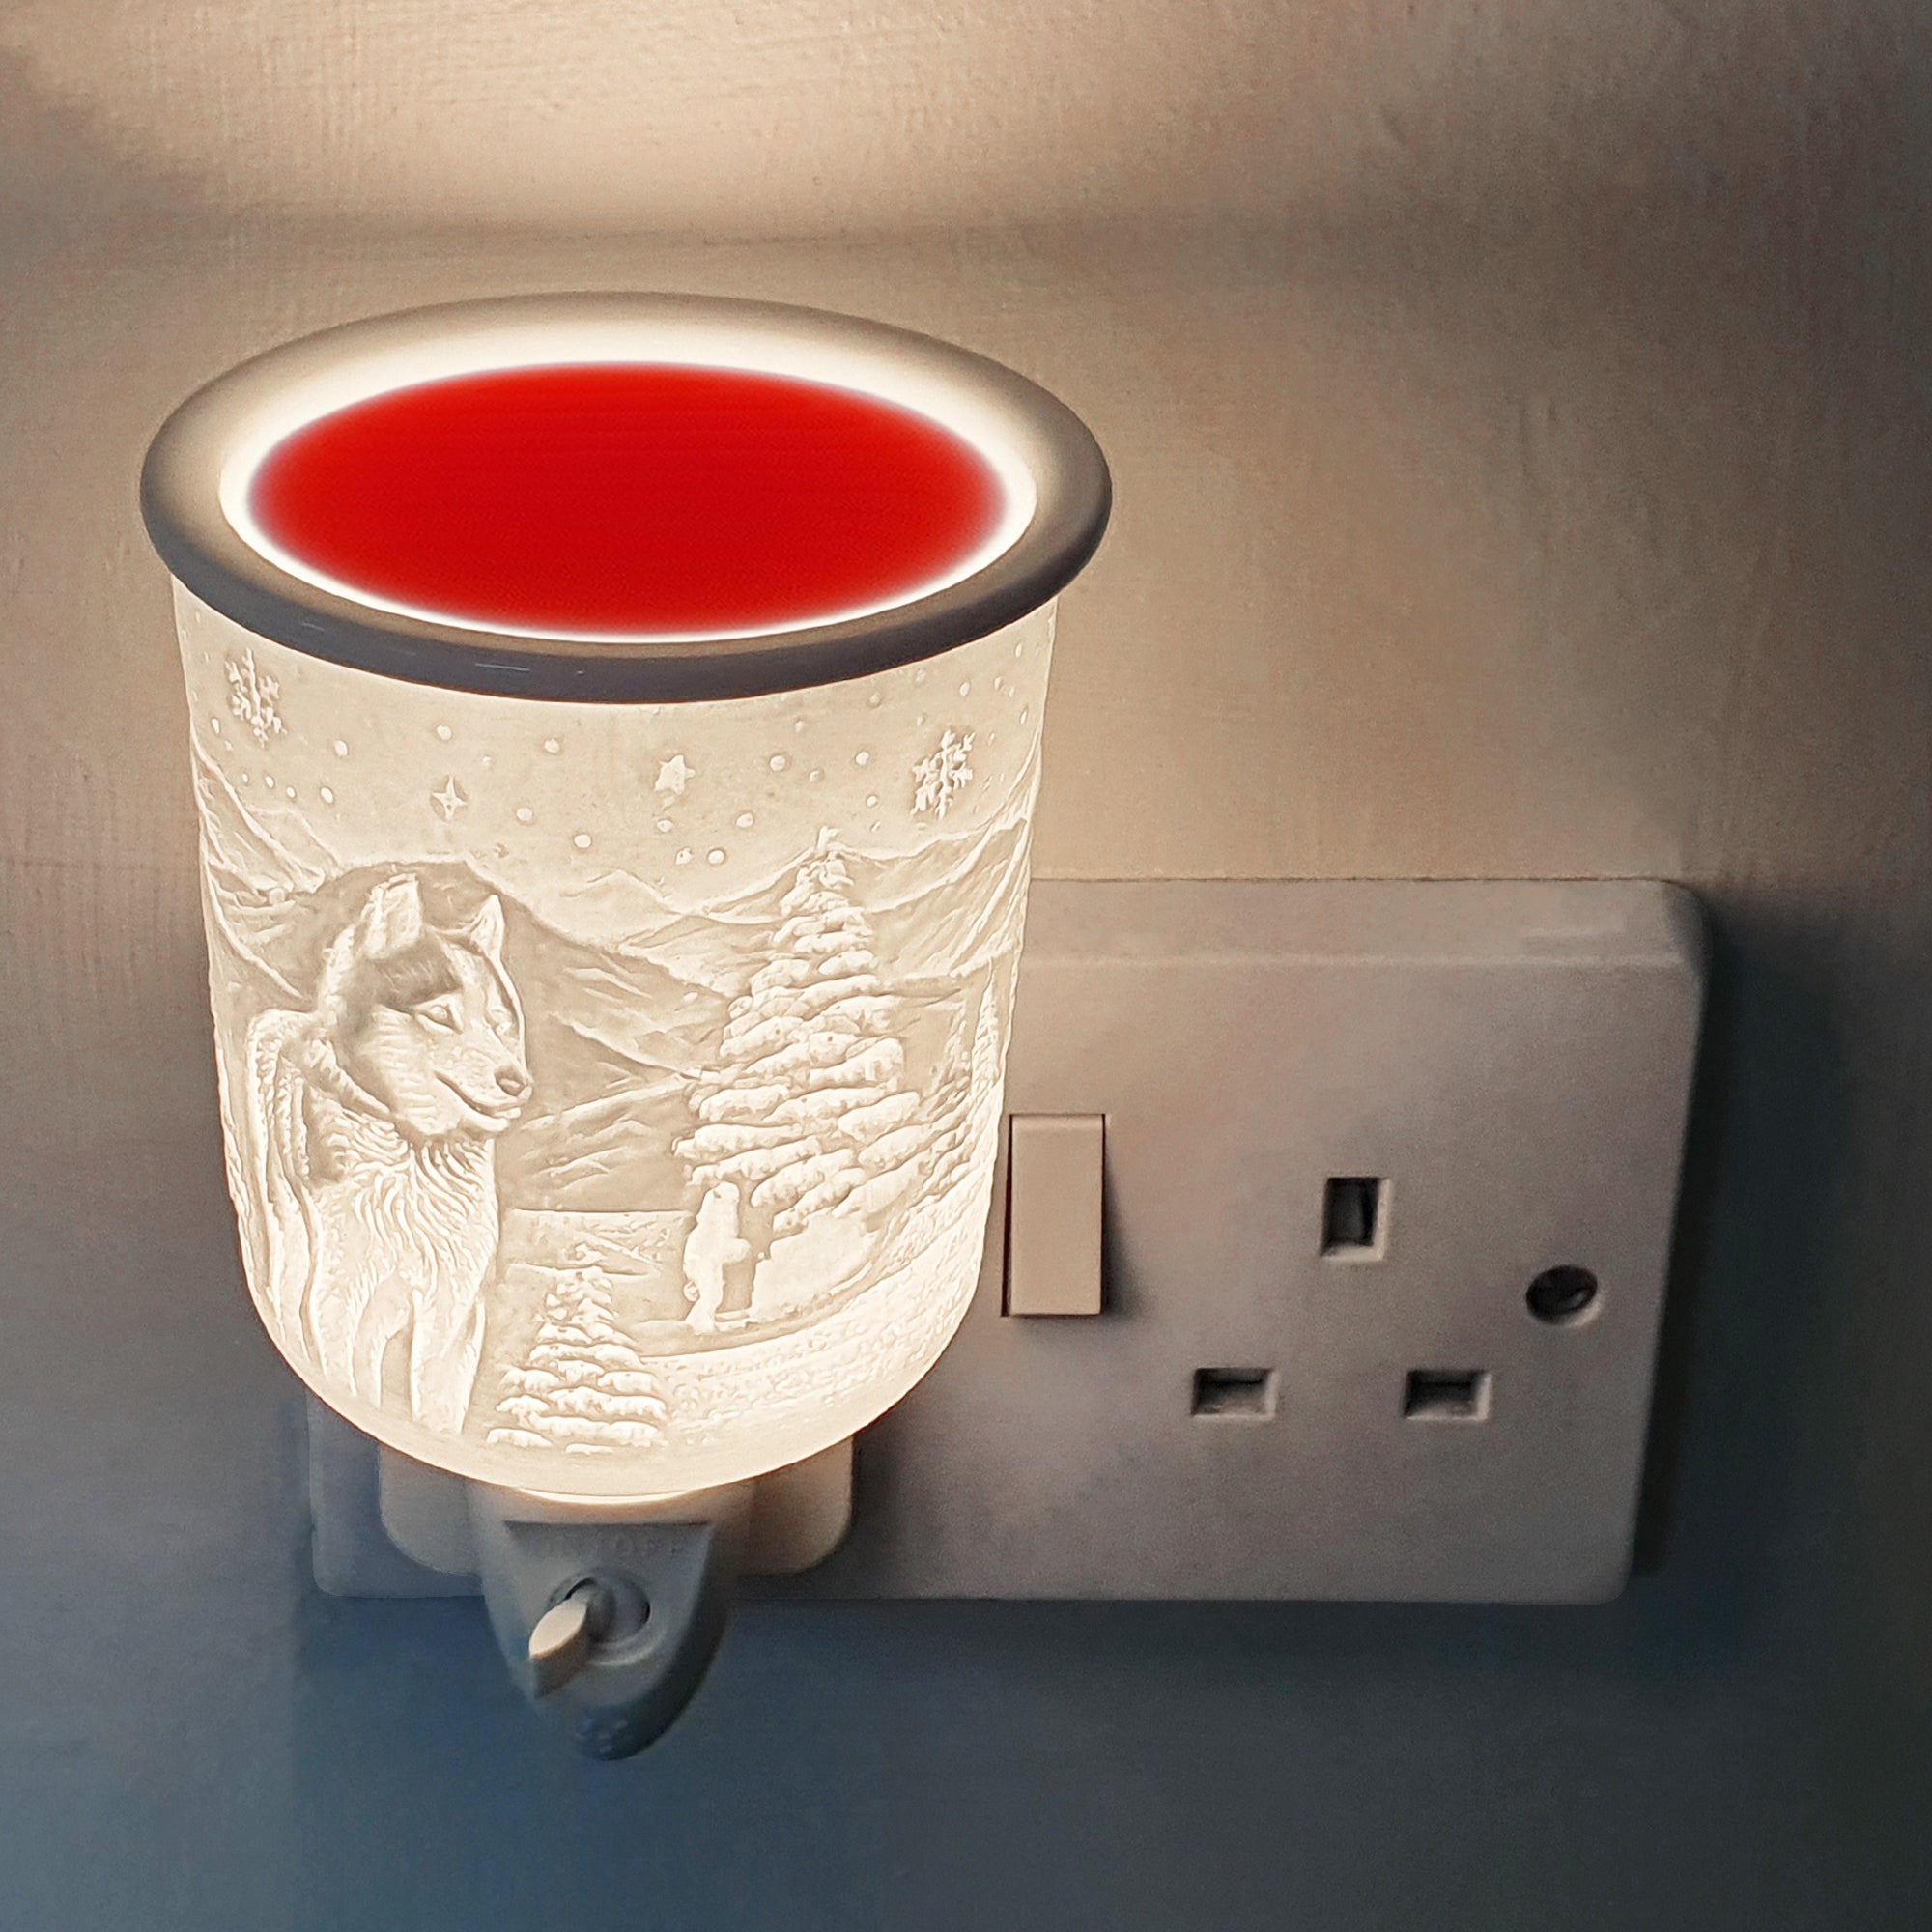 Cello - Porcelain Plug In Electric Warmer - Dog